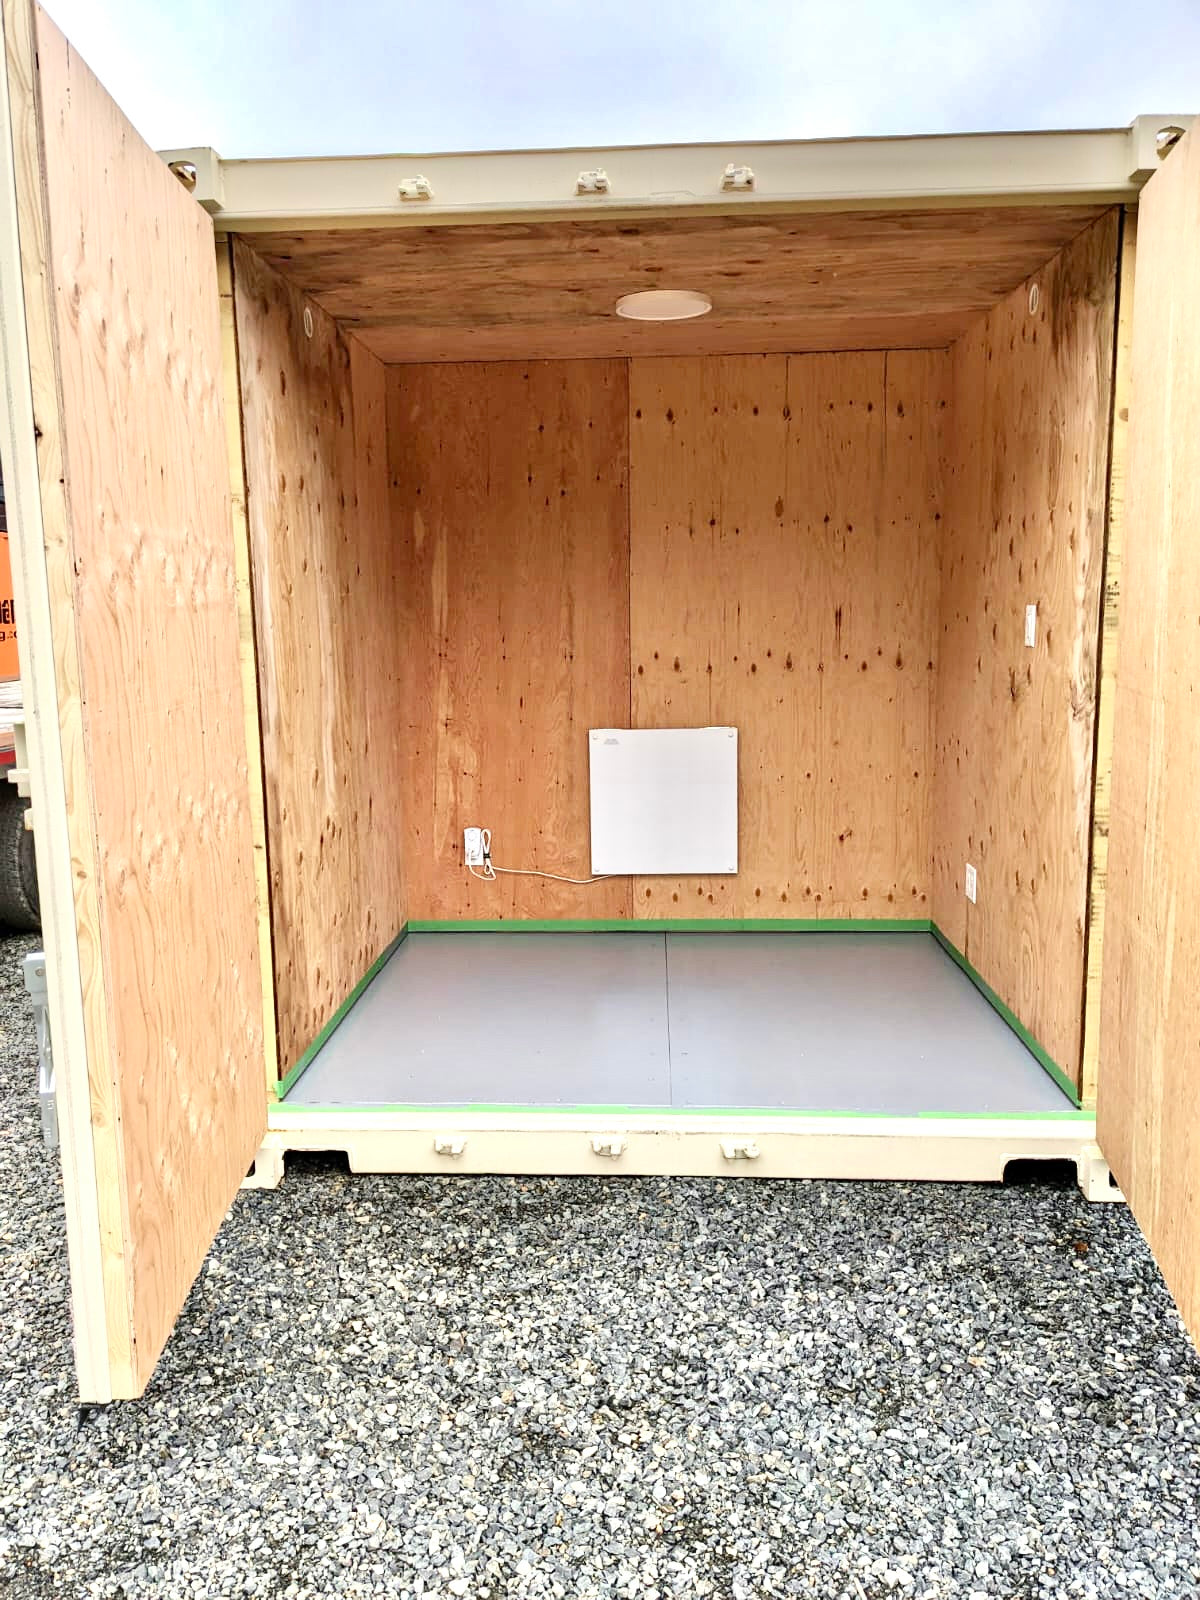 20 Foot Shipping Container Office - The Get Stuff Done Box